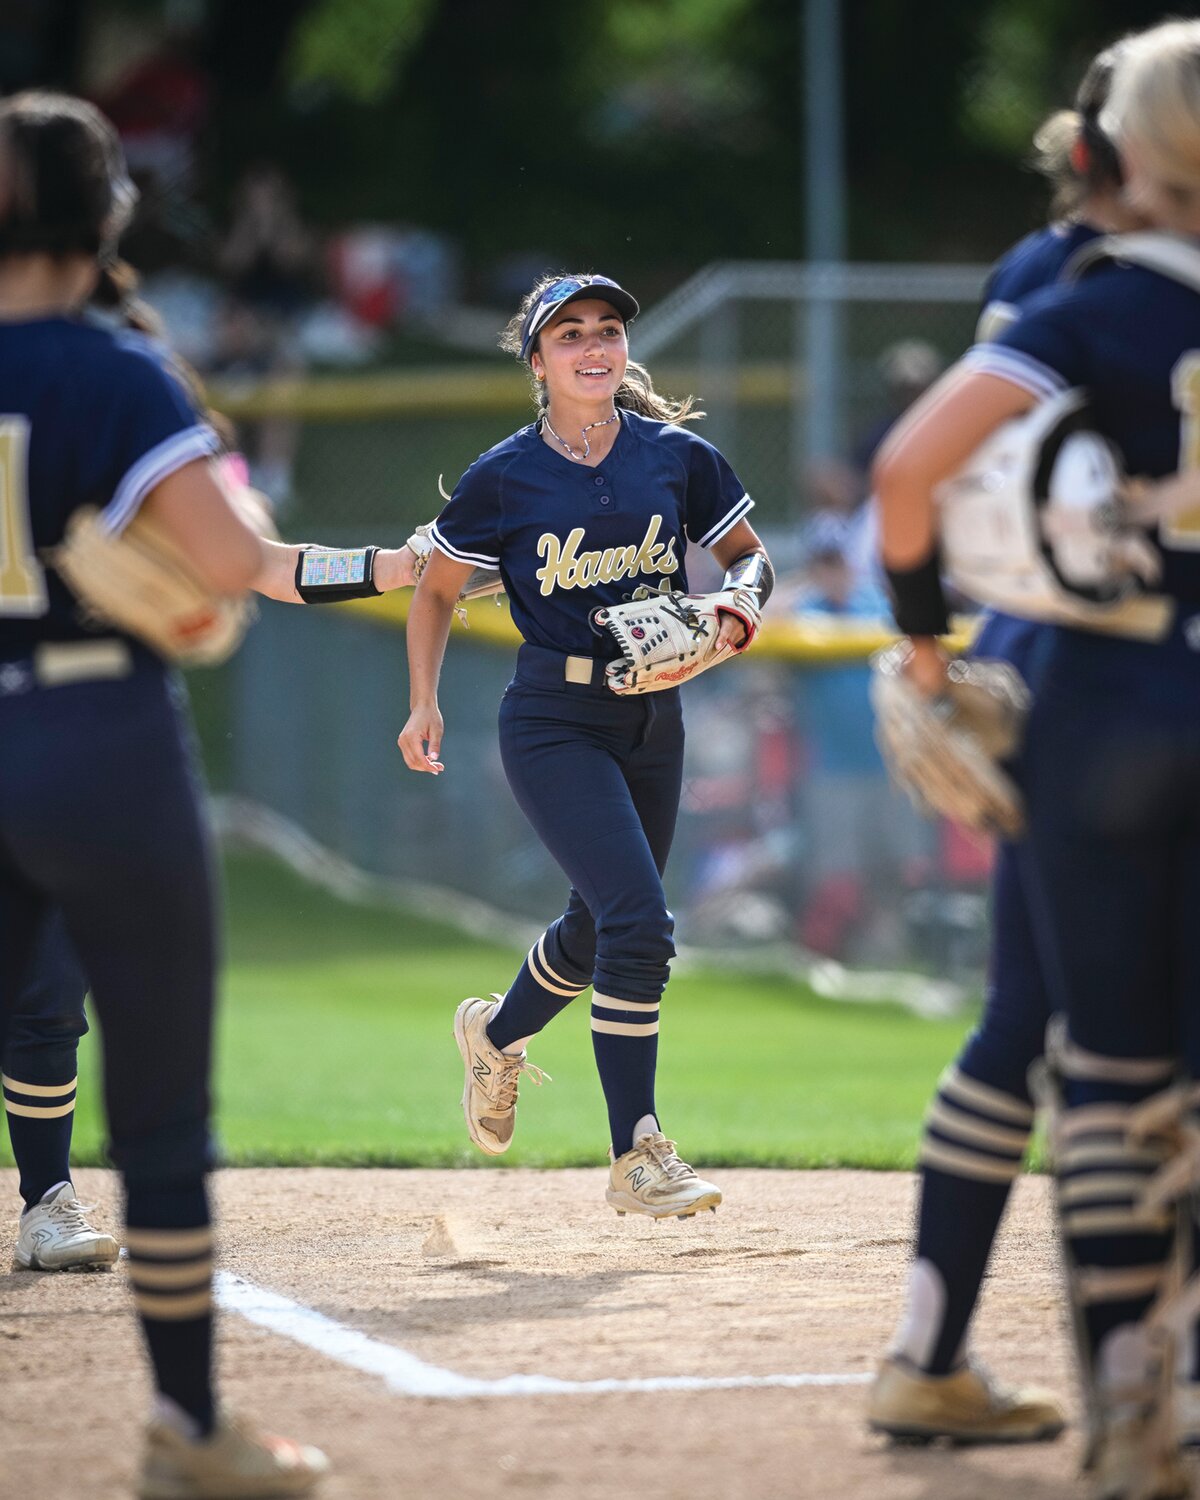 Council Rock South’s Gabby Bloom is all smiles after making a diving catch in the fifth inning.